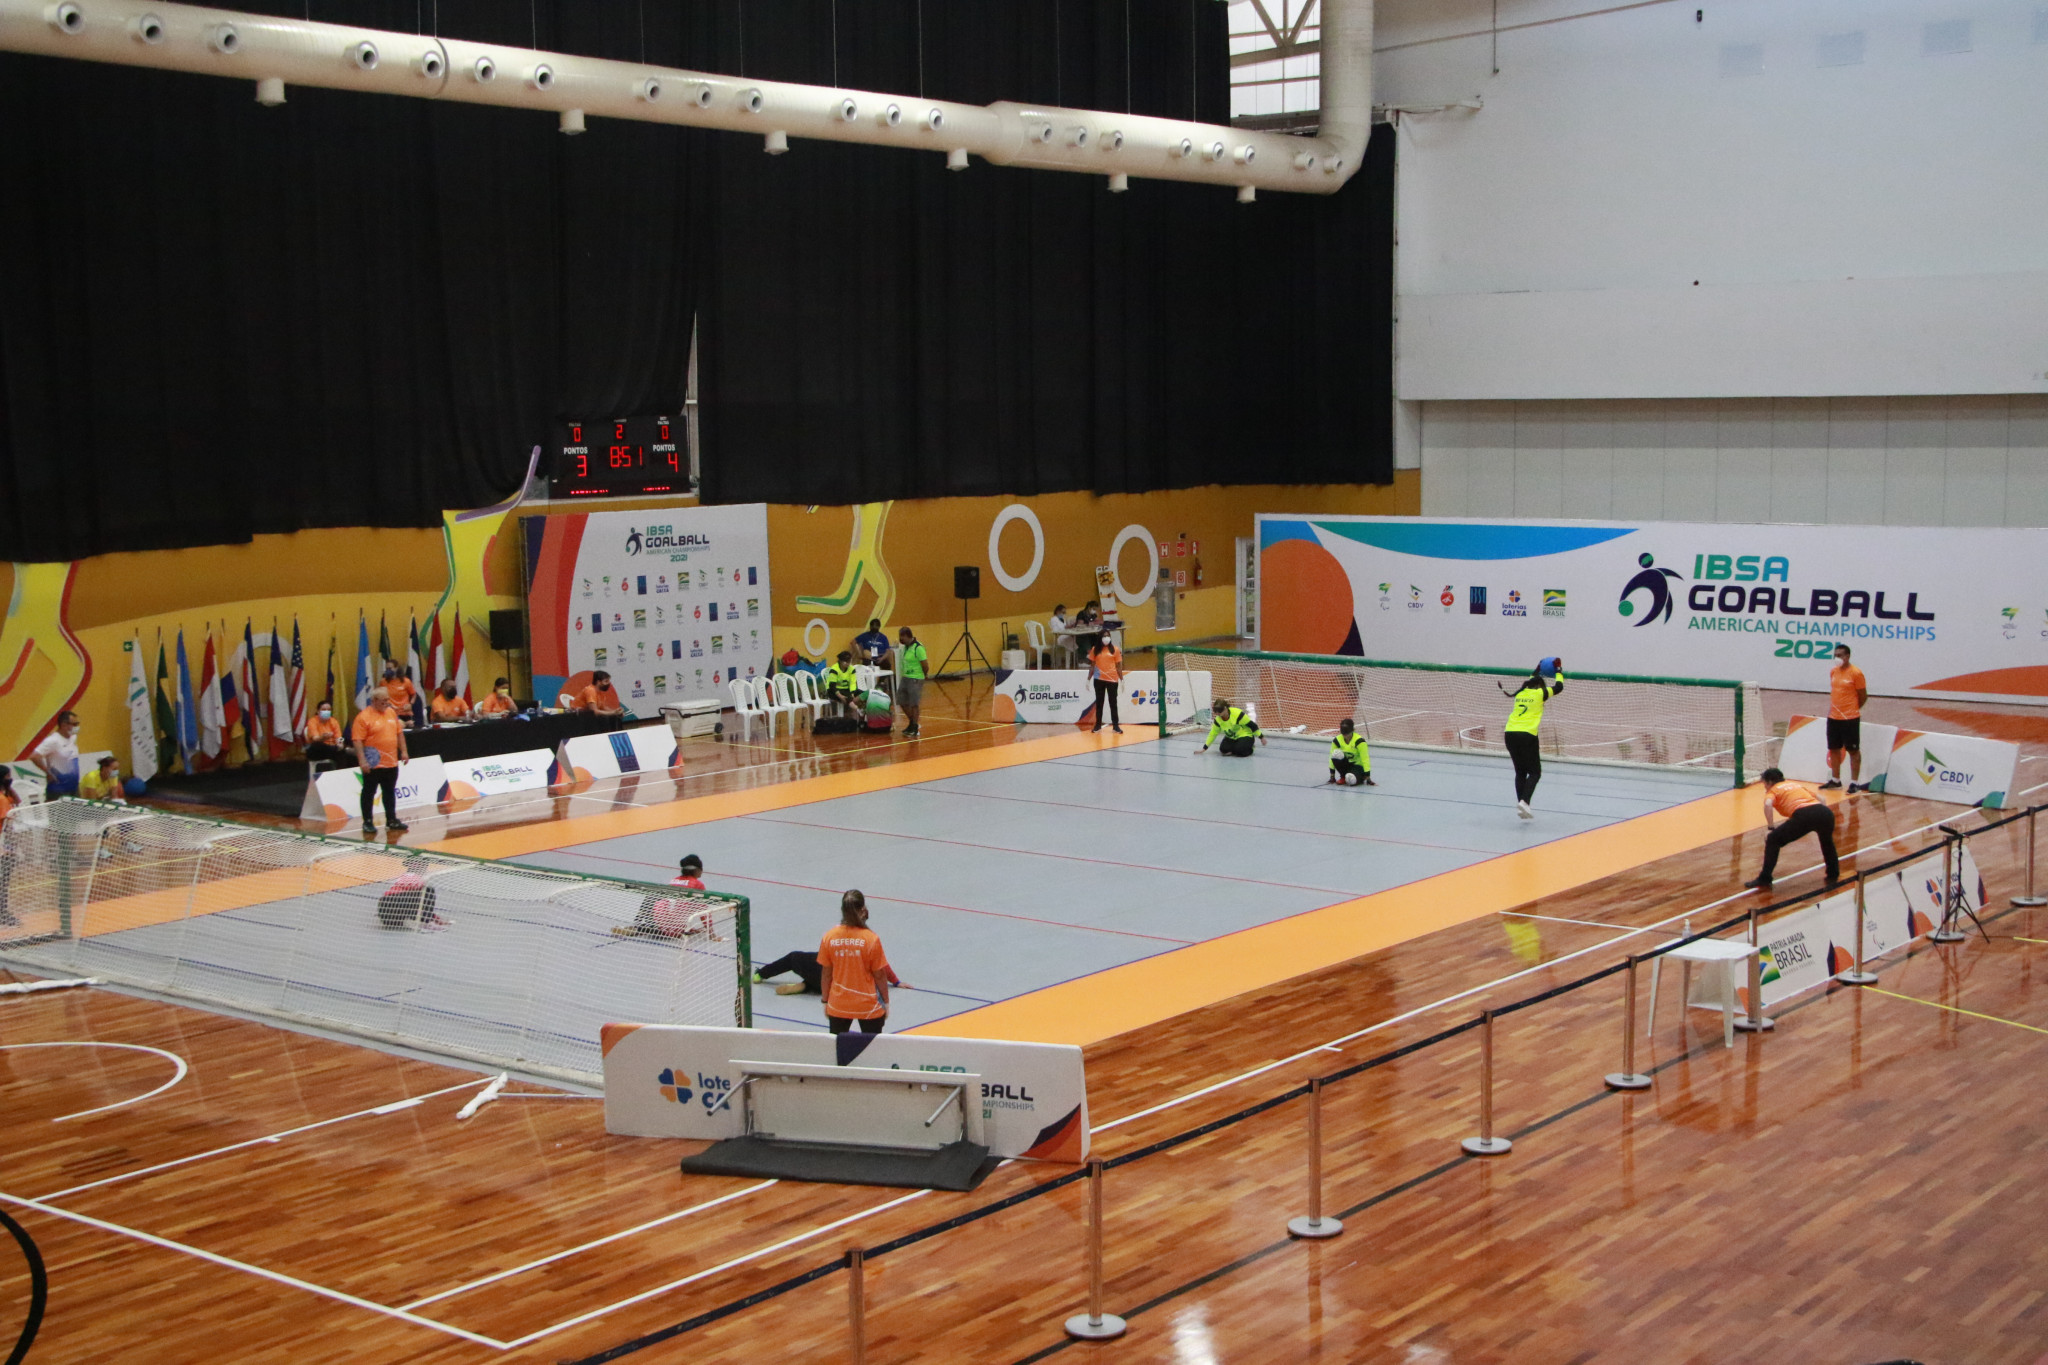 The pool stage of the IBSA Goalball Americas Championships in São Paulo is set to conclude tomorrow ©Renan Cacioli/CBDV